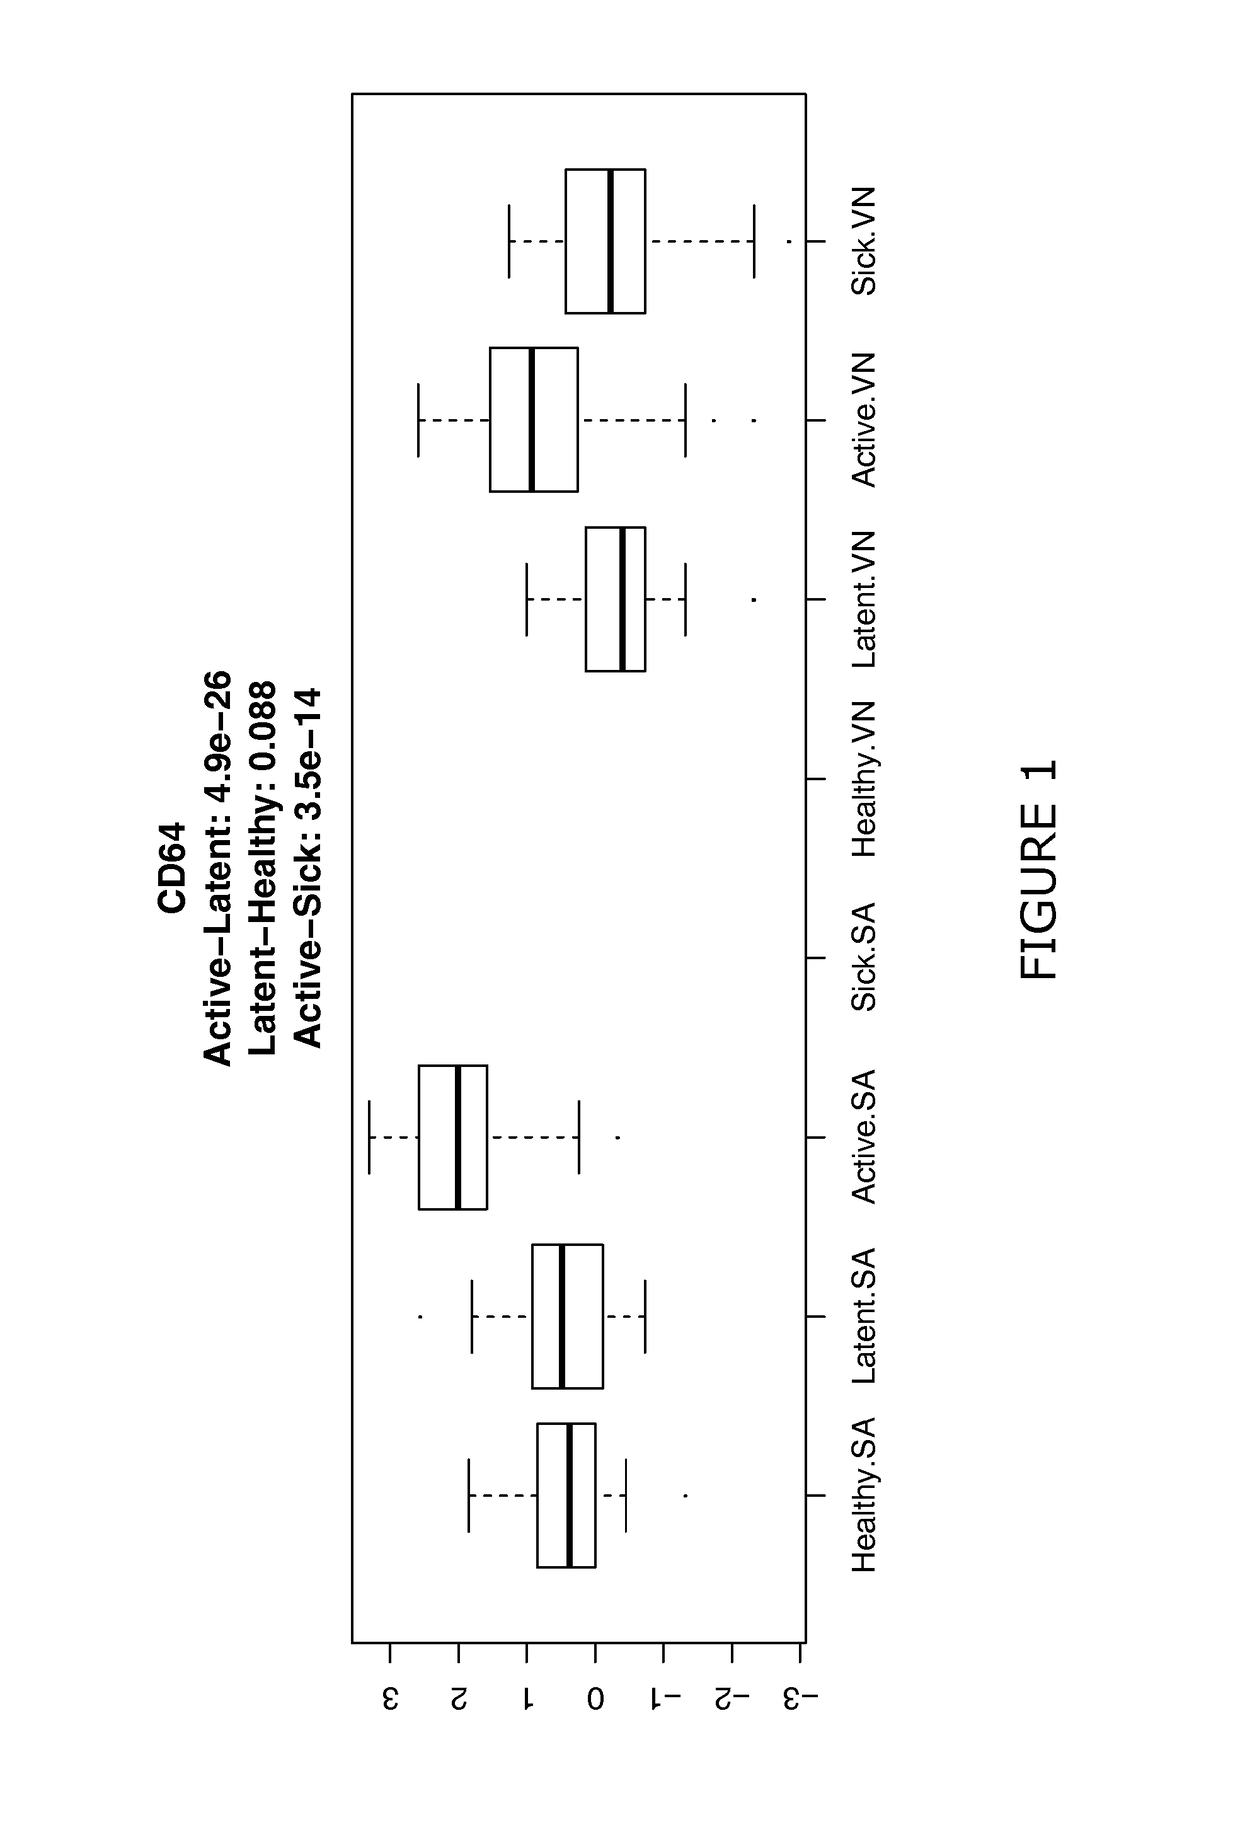 Methods of diagnosing and treating active tuberculosis in an individual